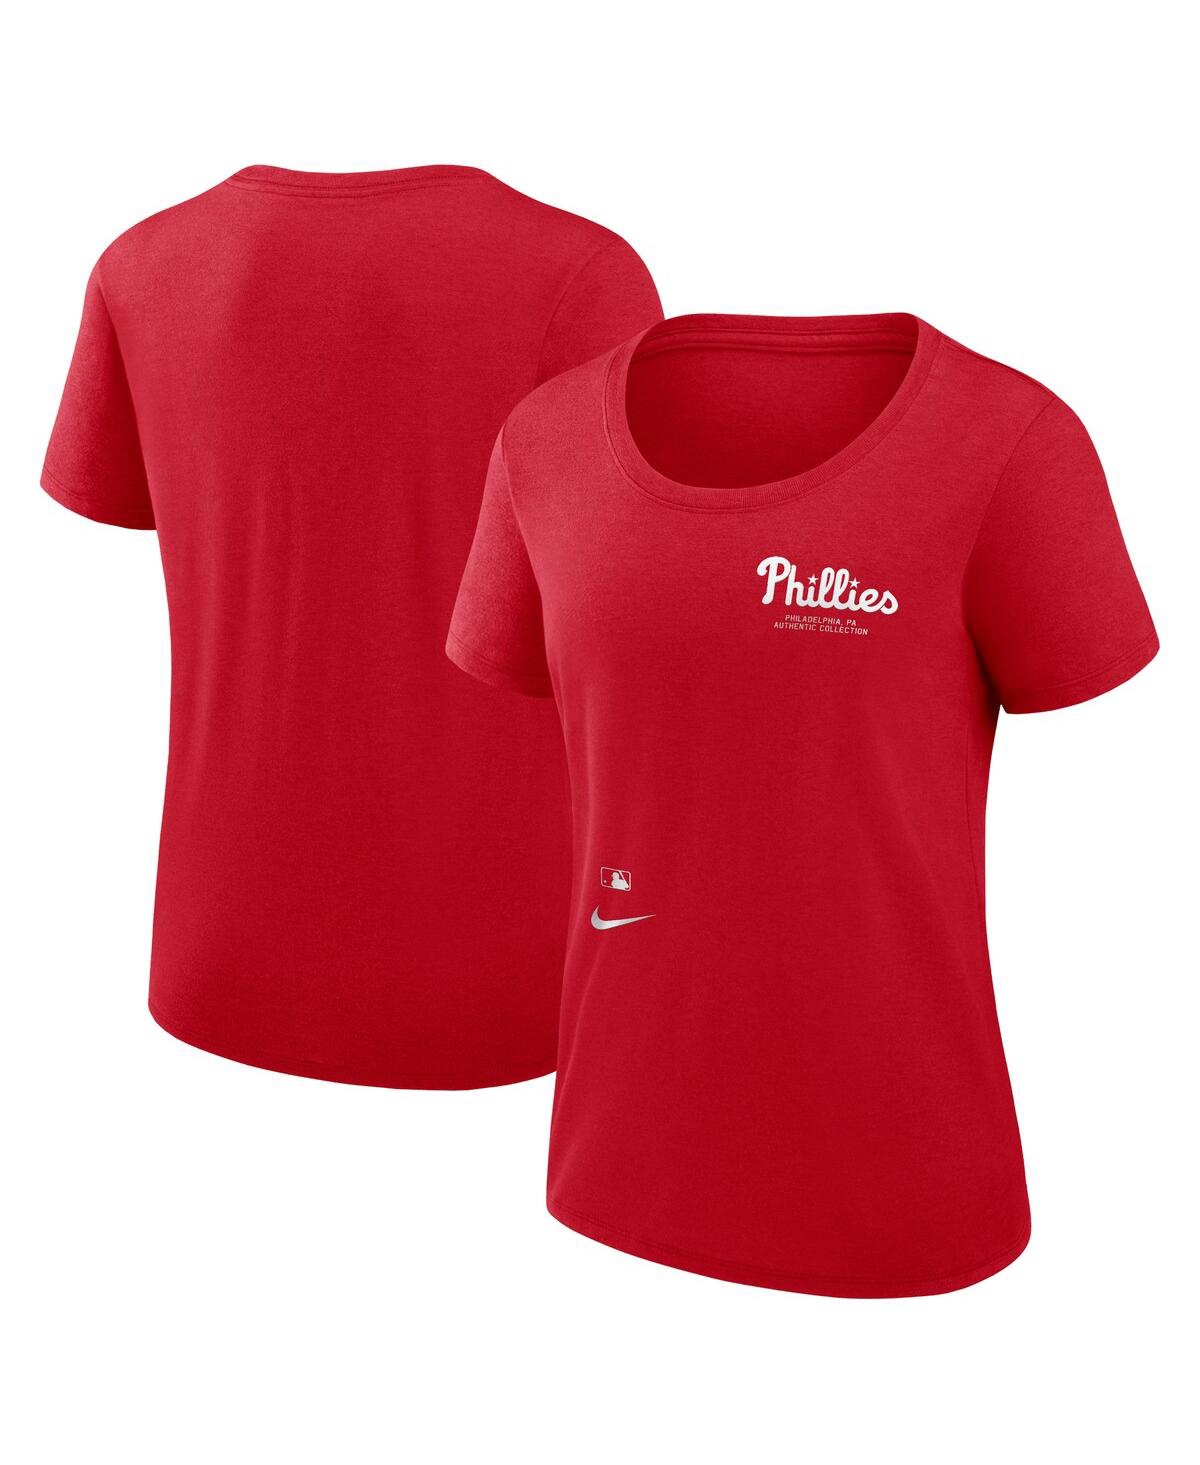 Shop Nike Women's  Red Philadelphia Phillies Authentic Collection Performance Scoop Neck T-shirt